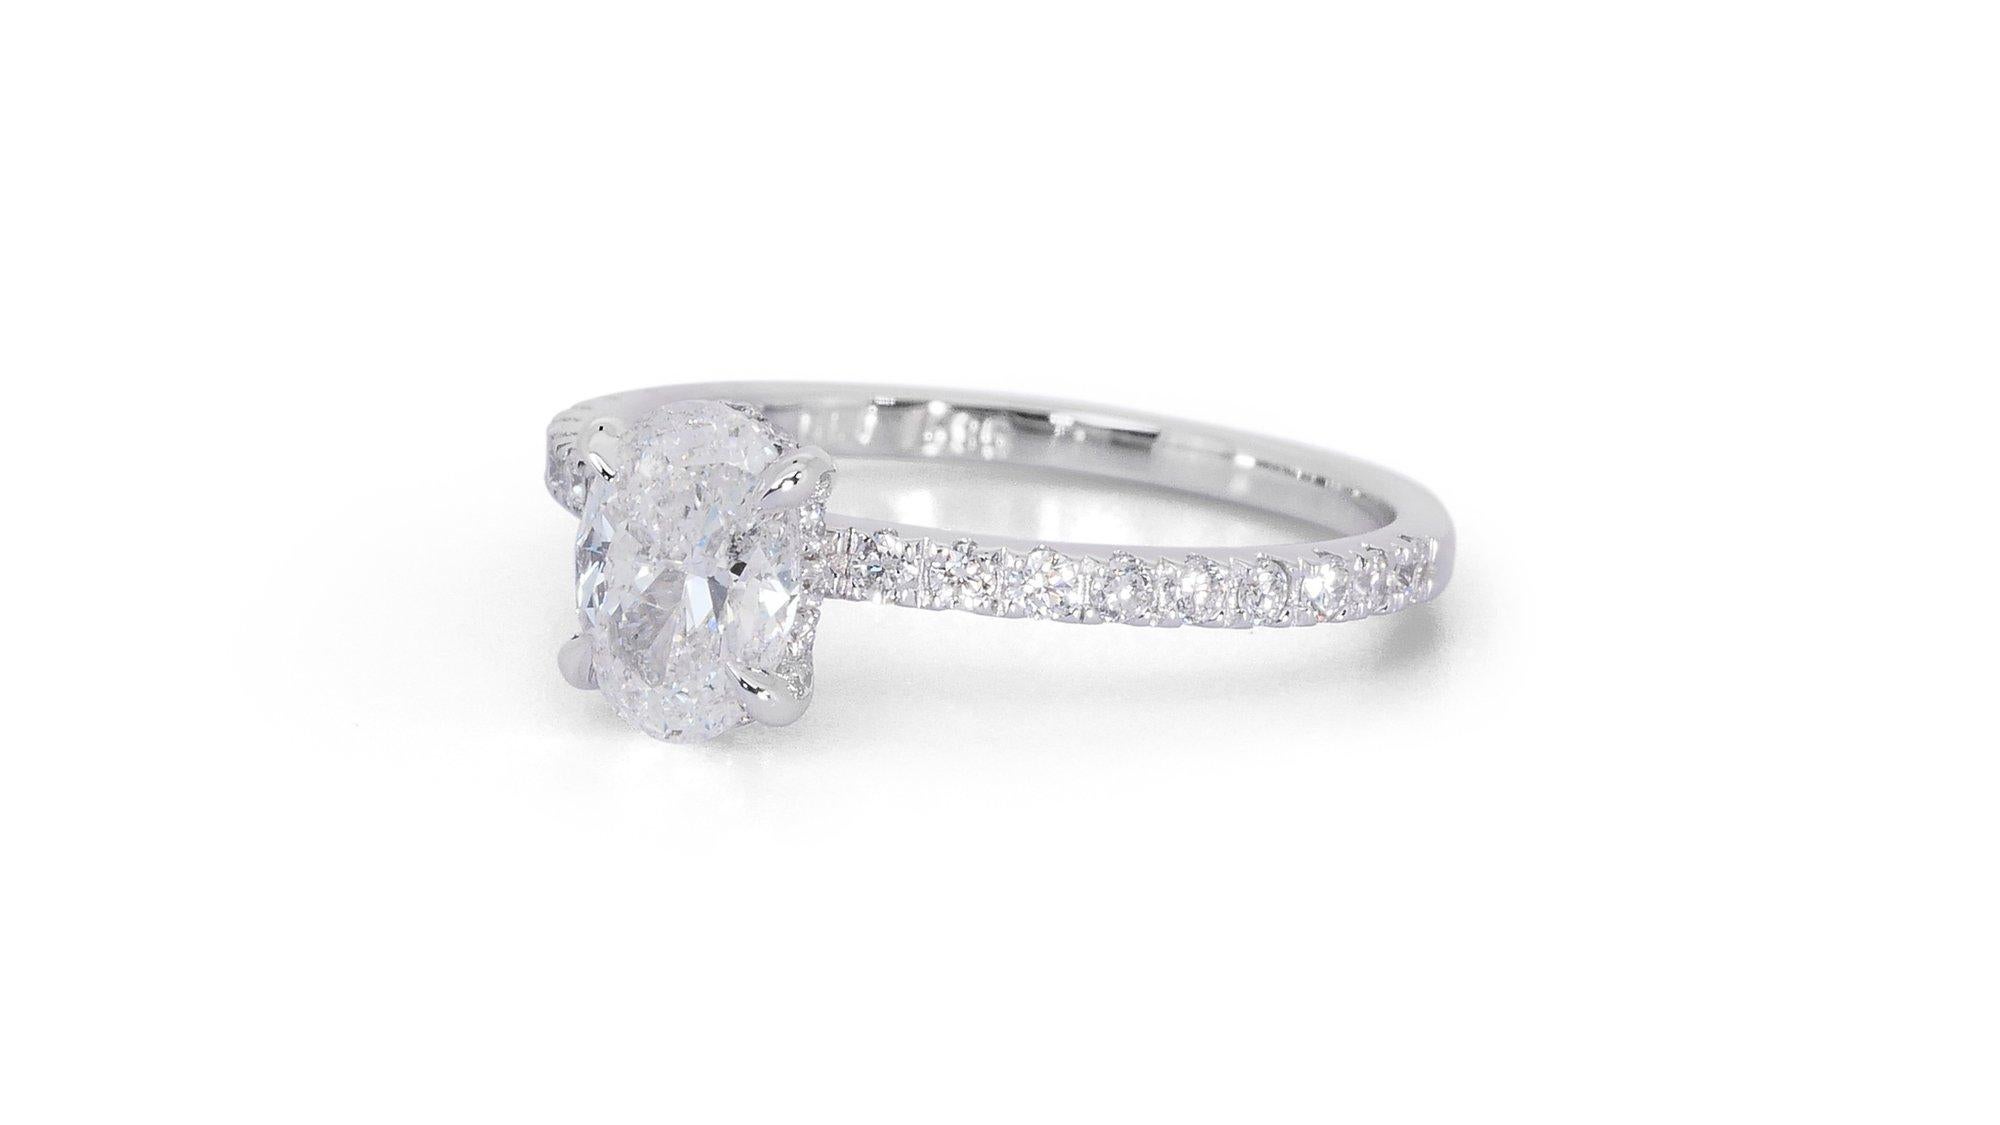 Fascinating 1.27ct Diamond Pave Ring in 18k White Gold - GIA Certified

Experience the epitome of elegance with this stunning 18k white gold pave ring, featuring a 1.01-carat oval-shaped diamond as its main stone. Complementing the oval diamond are